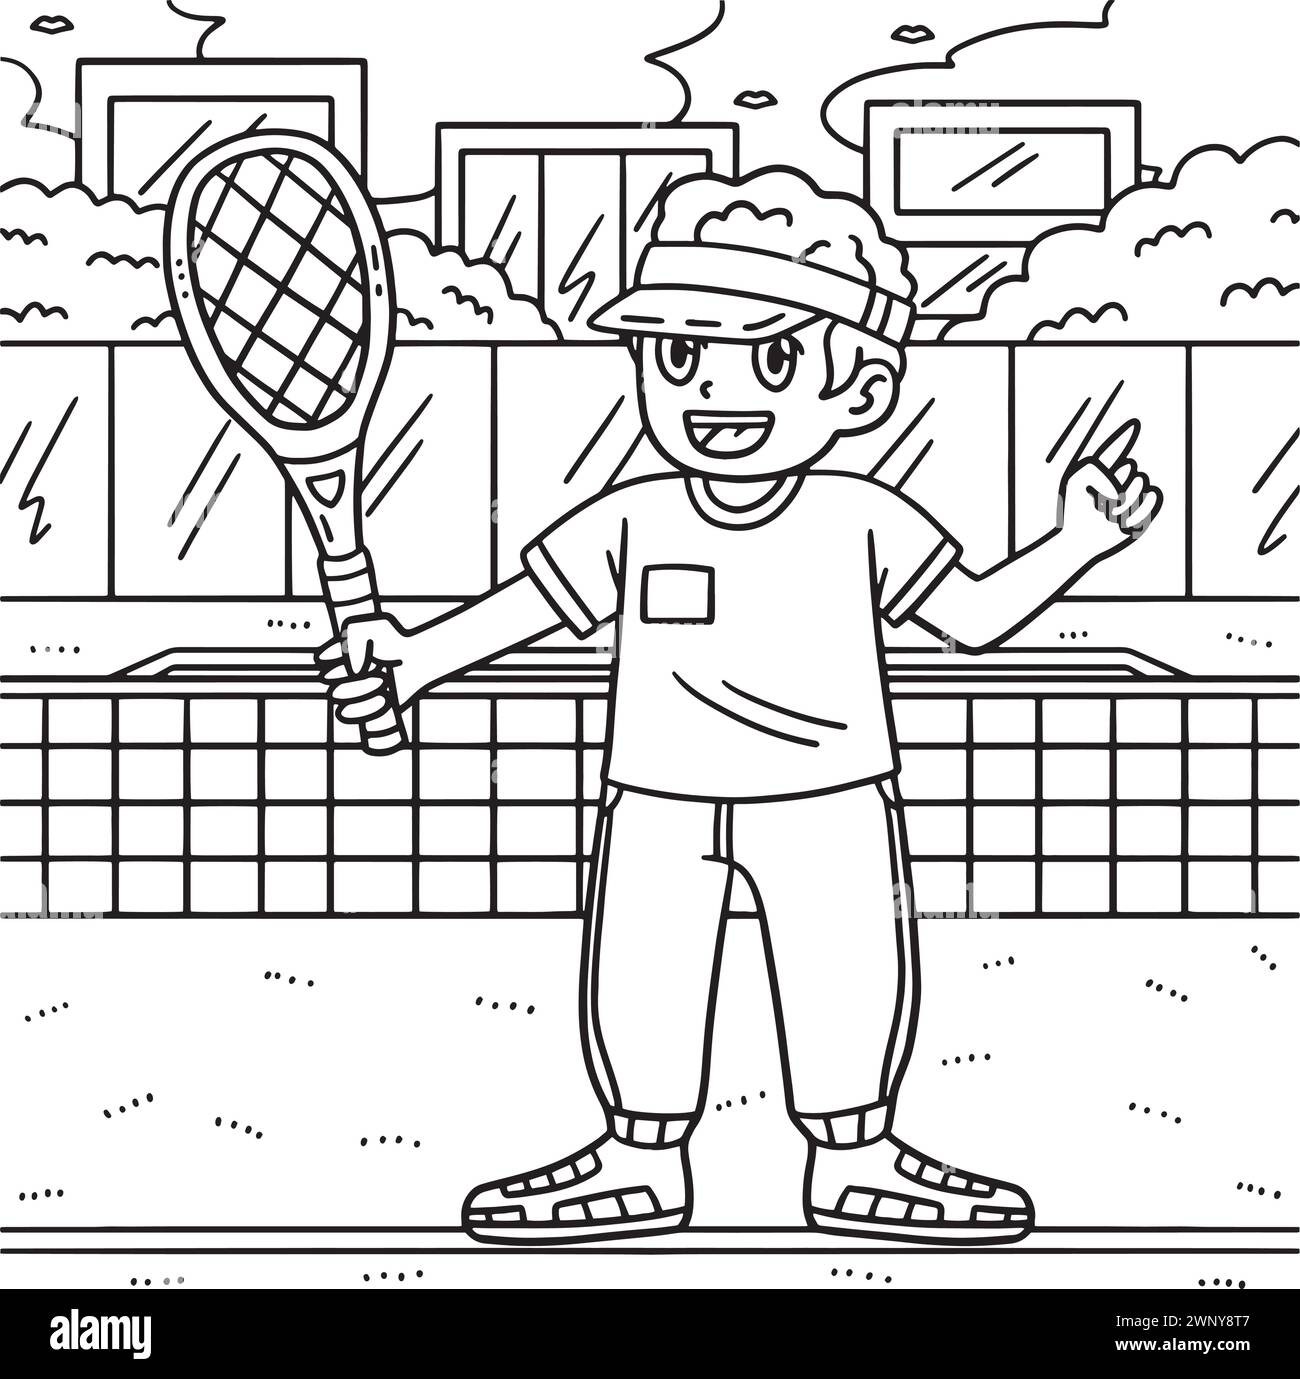 Tennis Coach with a Tennis Racket Coloring Page  Stock Vector